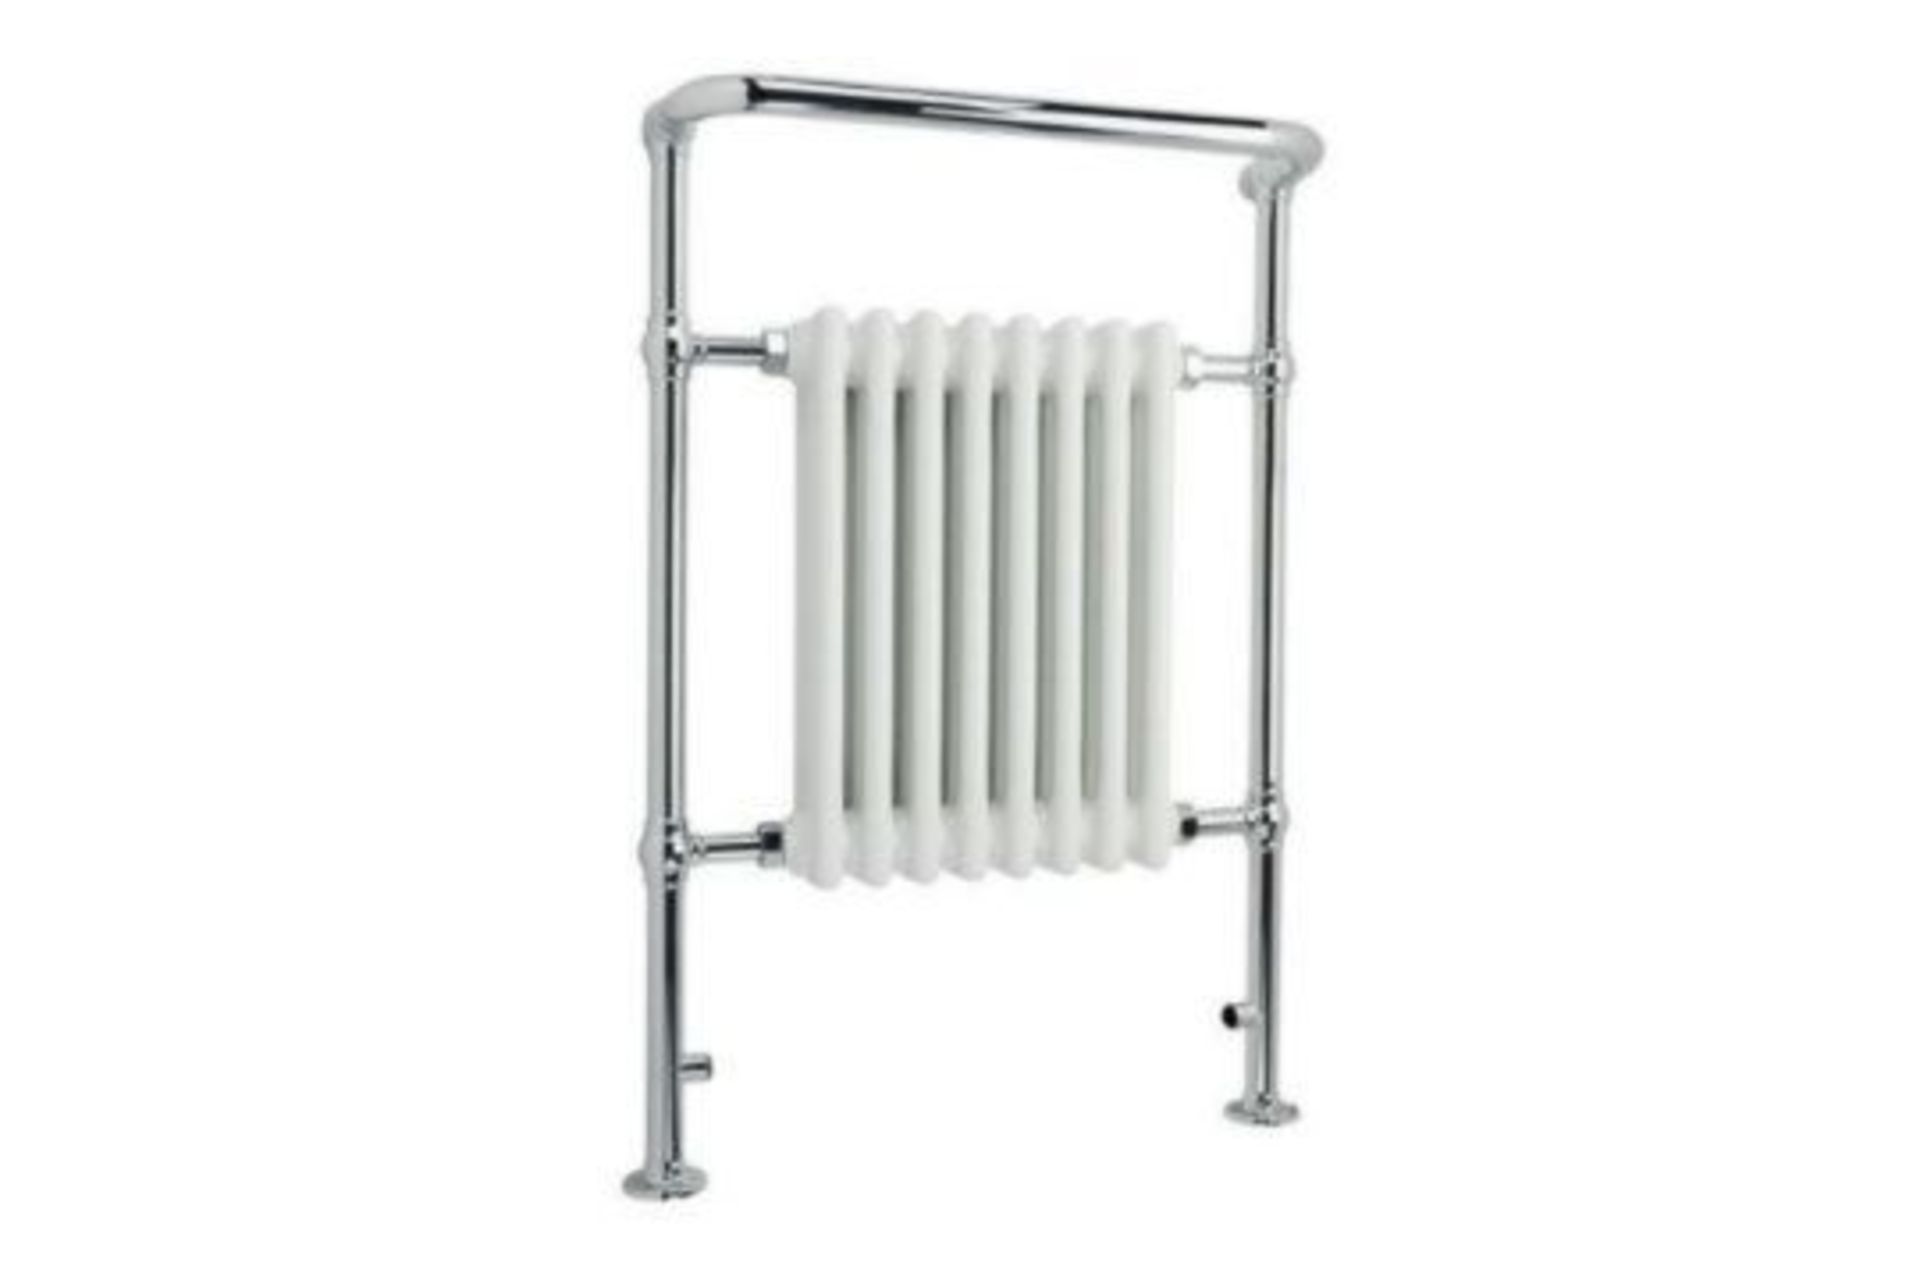 NEW NEW 952x659mm Large Traditional White Premium Towel Rail Radiator.RRP £499.99.We love this... - Image 2 of 2